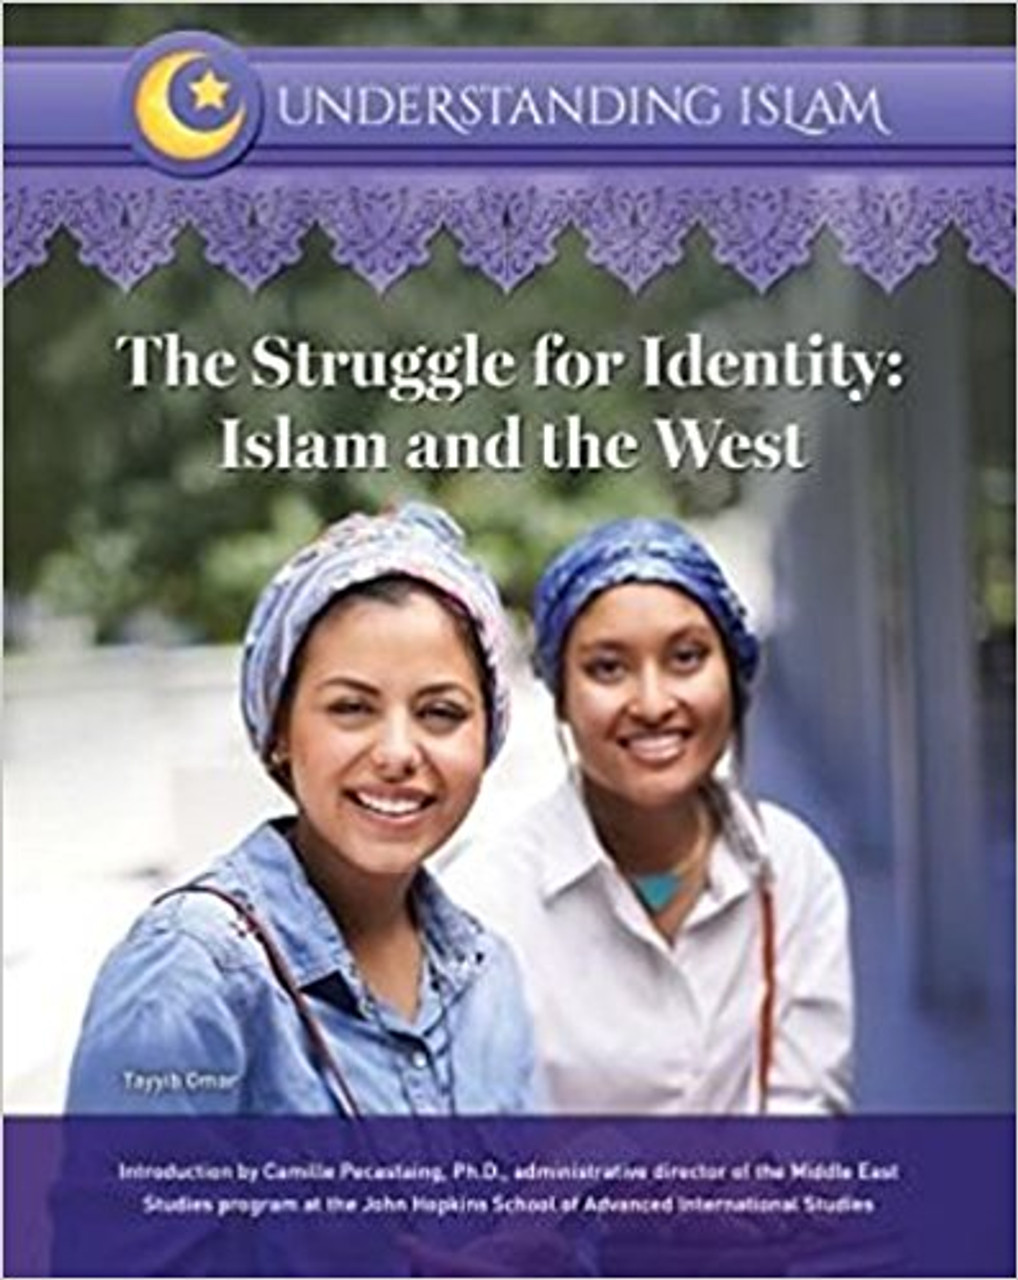 The Struggle for Identity: Islam and the West by Tayyib Omar